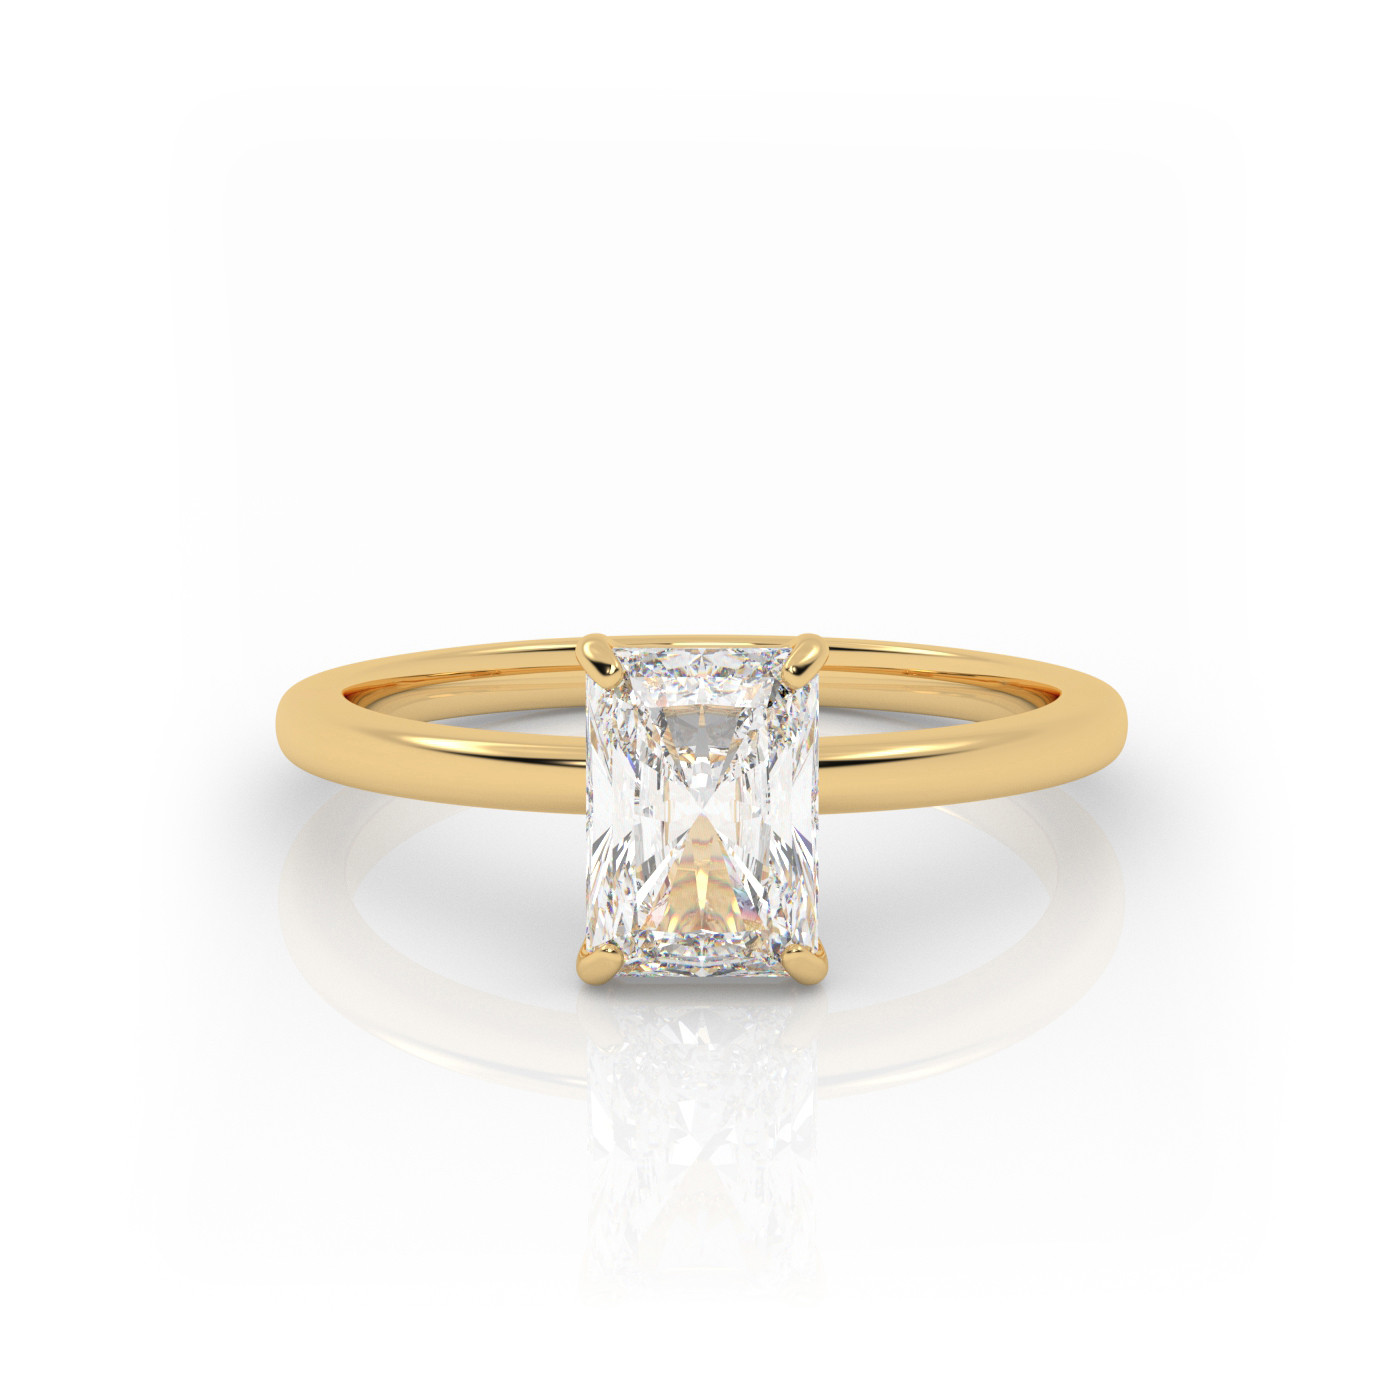 18K YELLOW GOLD Radiant Diamond Cut Solitaire Engagement Ring